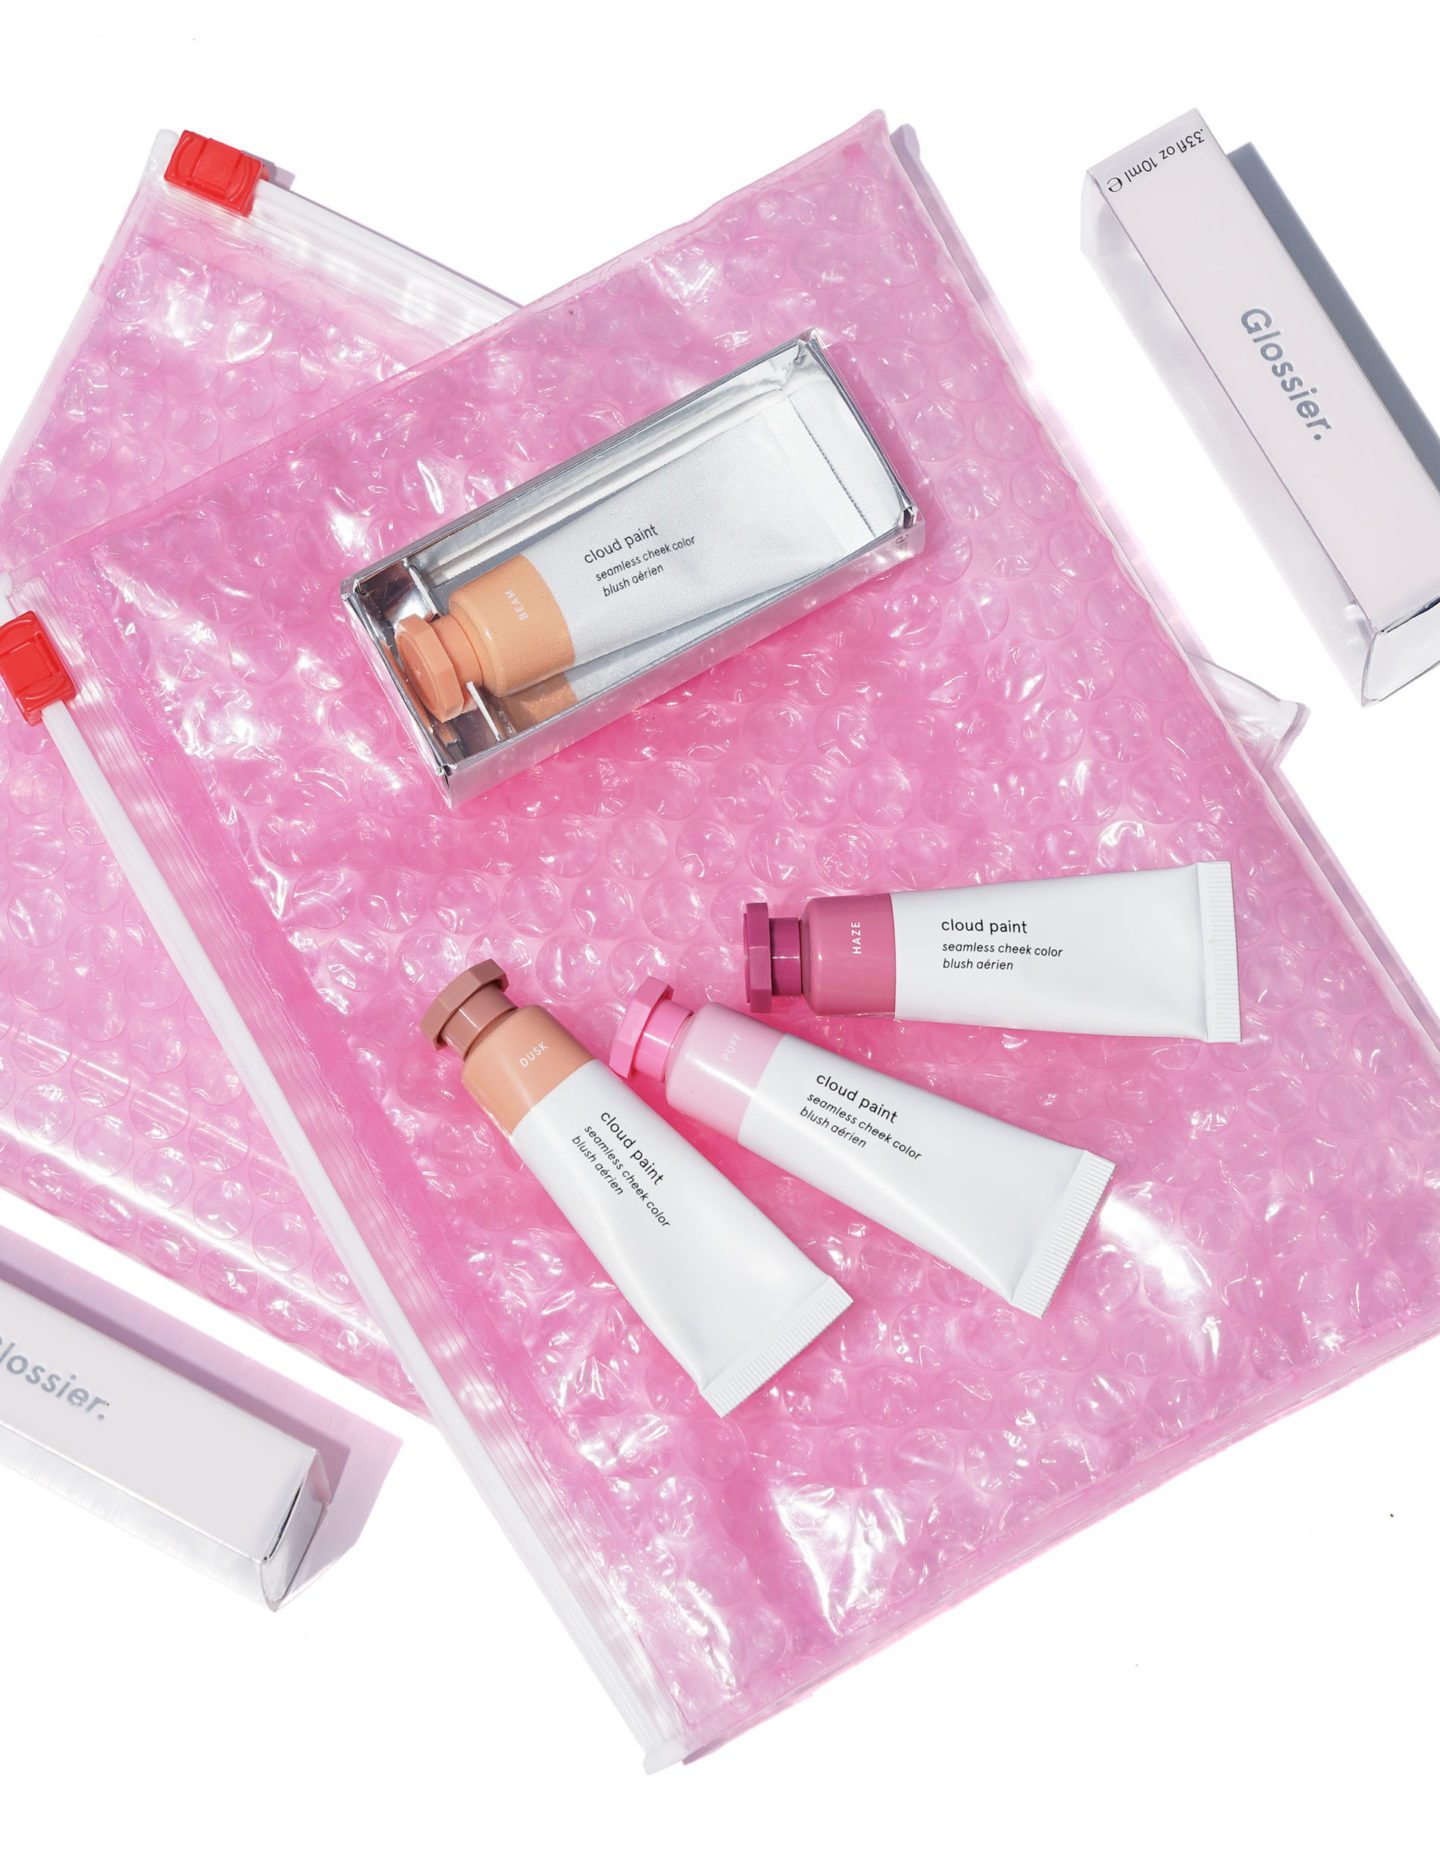 Glossier Cloud Paint Review | The Beauty Look Book